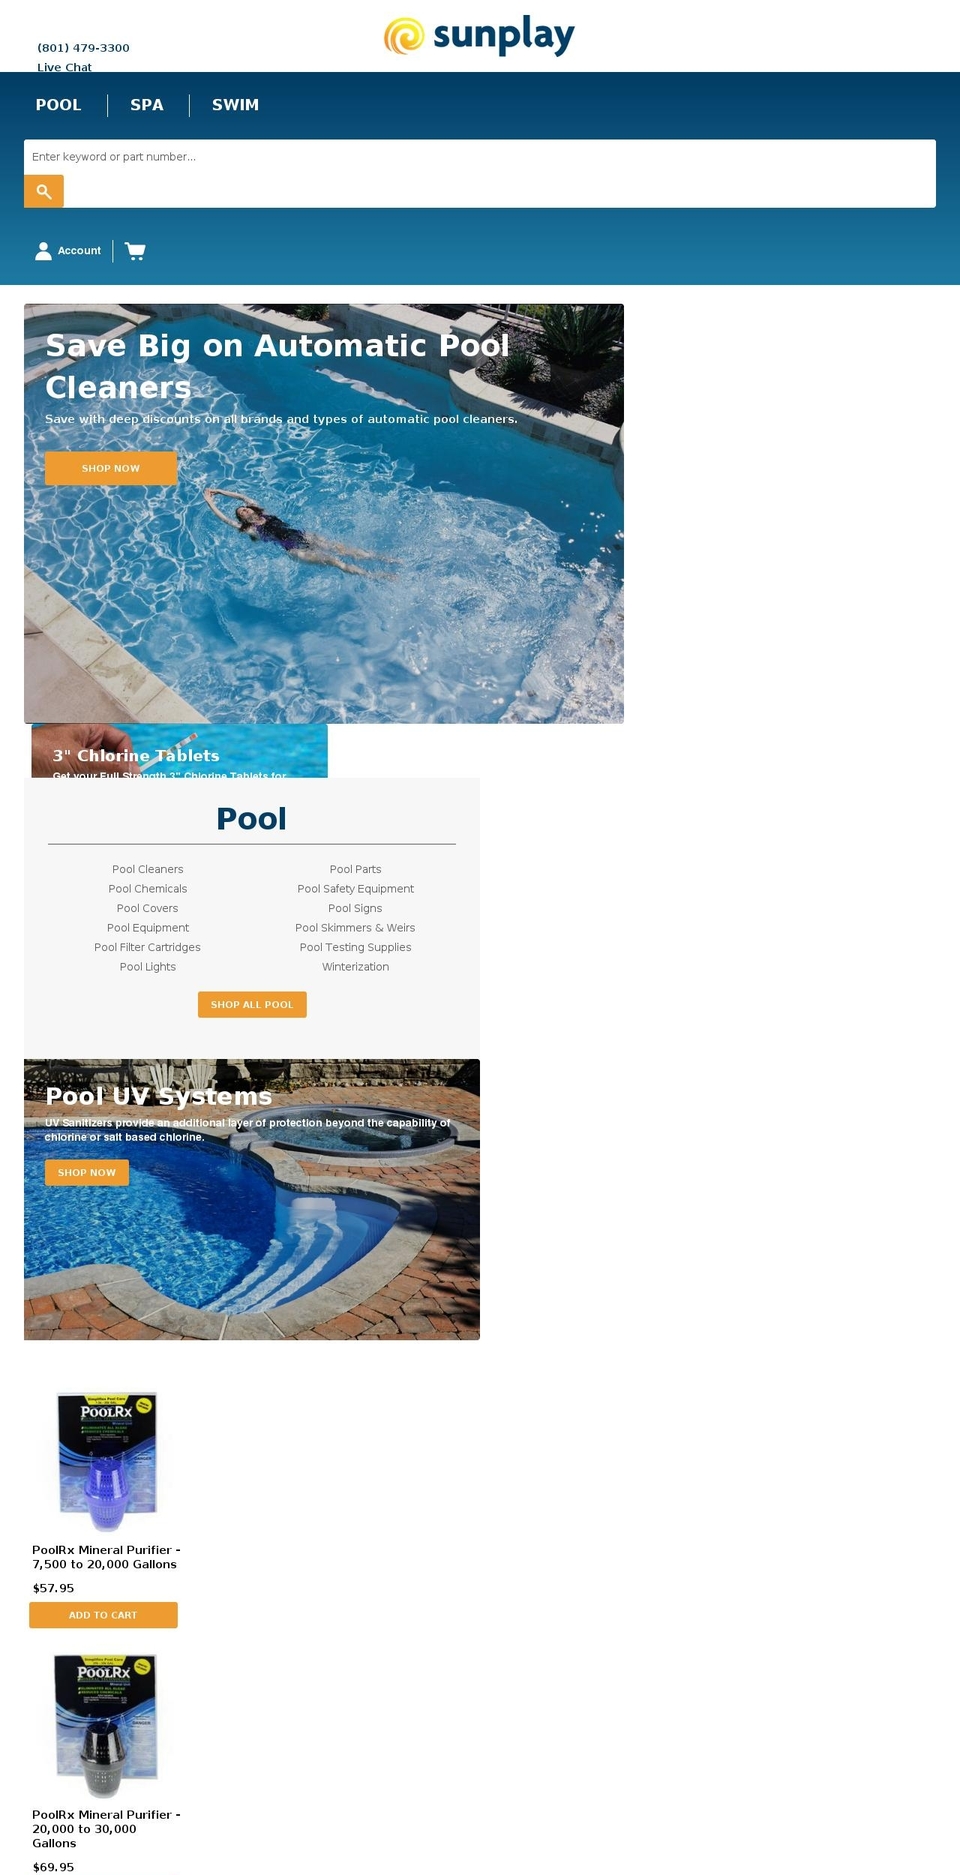 Sunplay v1.0 [Speck - Collection] Shopify theme site example sunplay.net